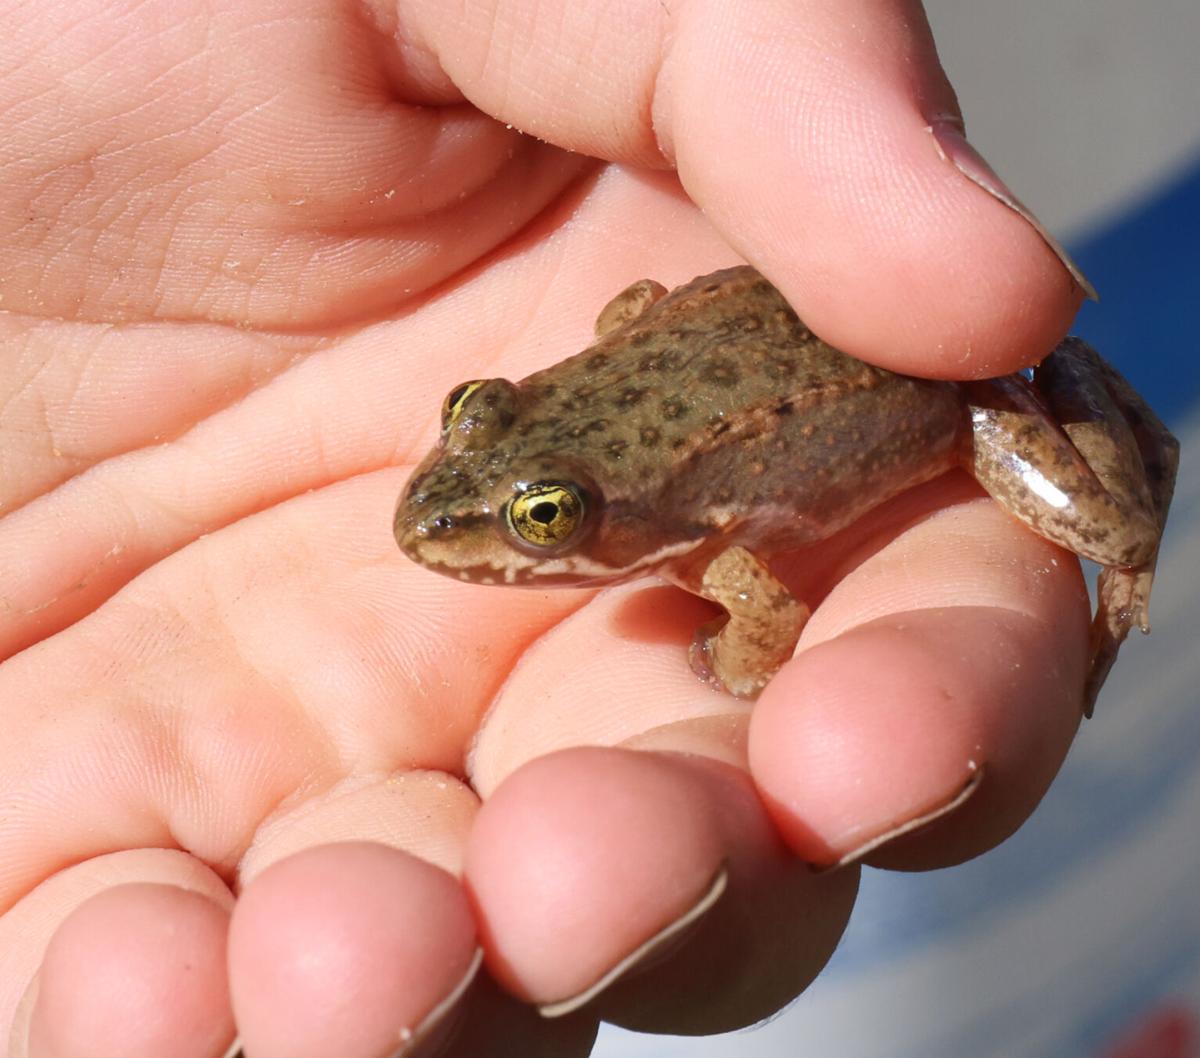 Oregon spotted frogs in Bend's Old Mill are supersized, Environment